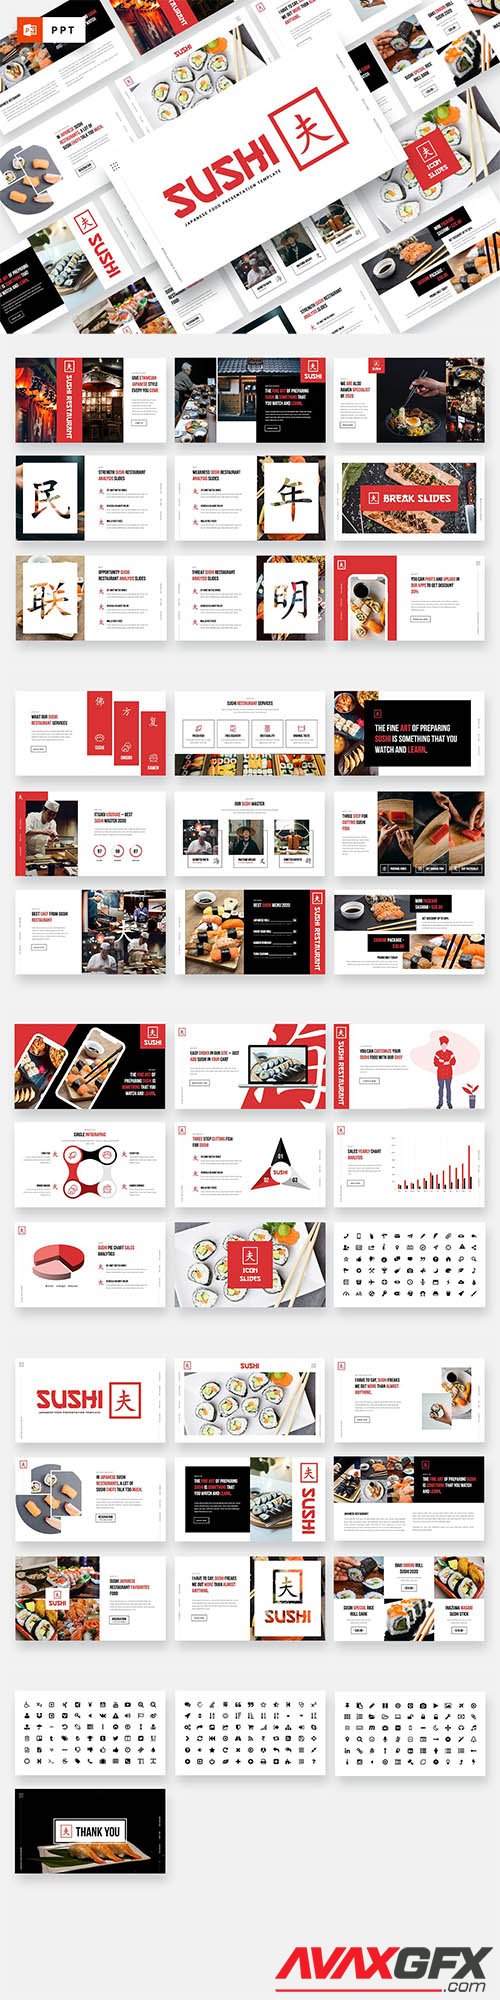 SUSHI - Japanese Food Powerpoint Template